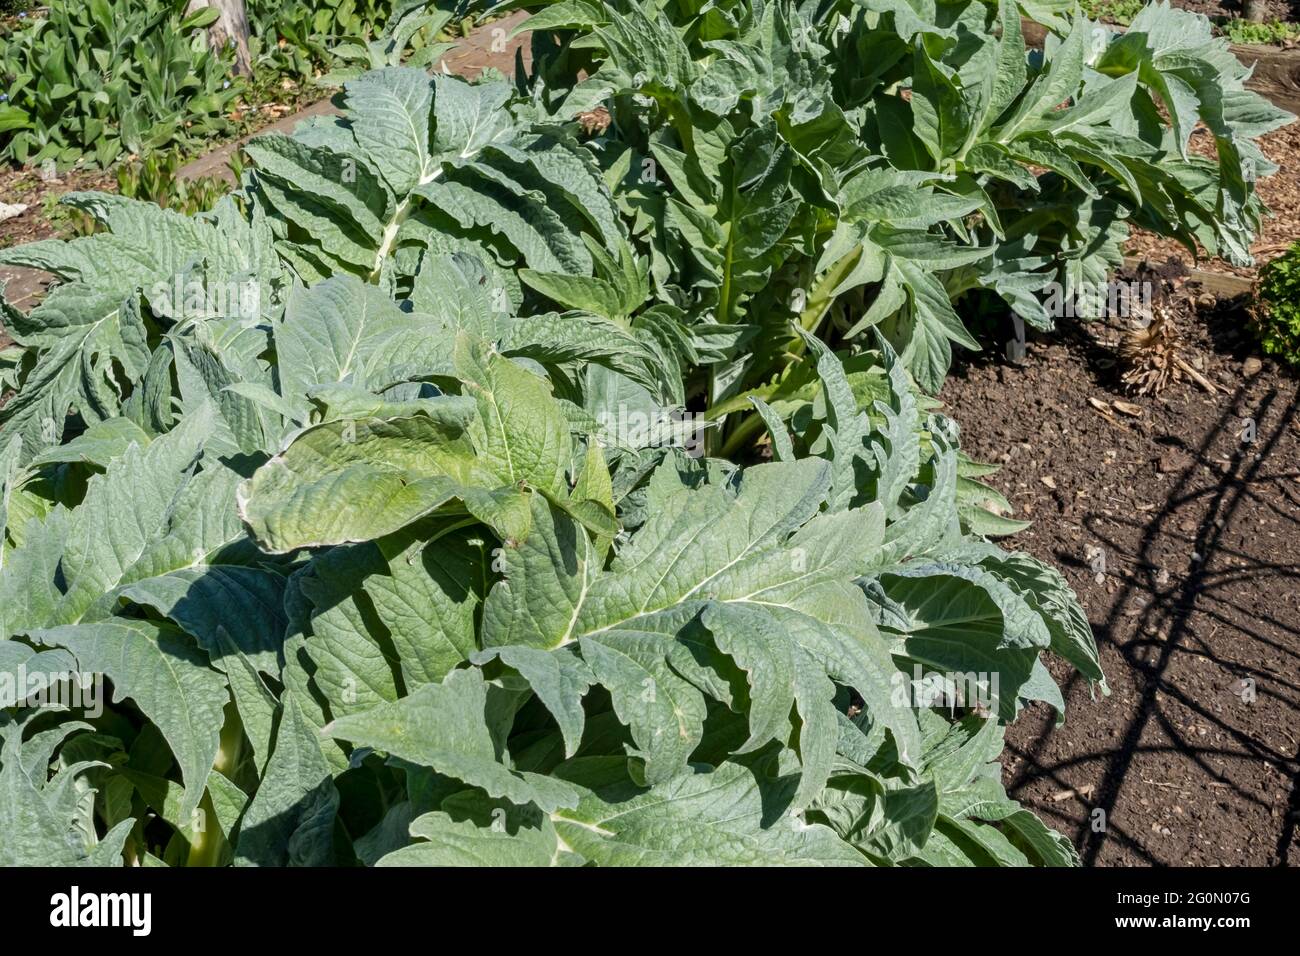 Close up of cardoons artichoke vegetable plant plants vegetables growing in the garden in spring England UK United Kingdom GB Great Britain Stock Photo